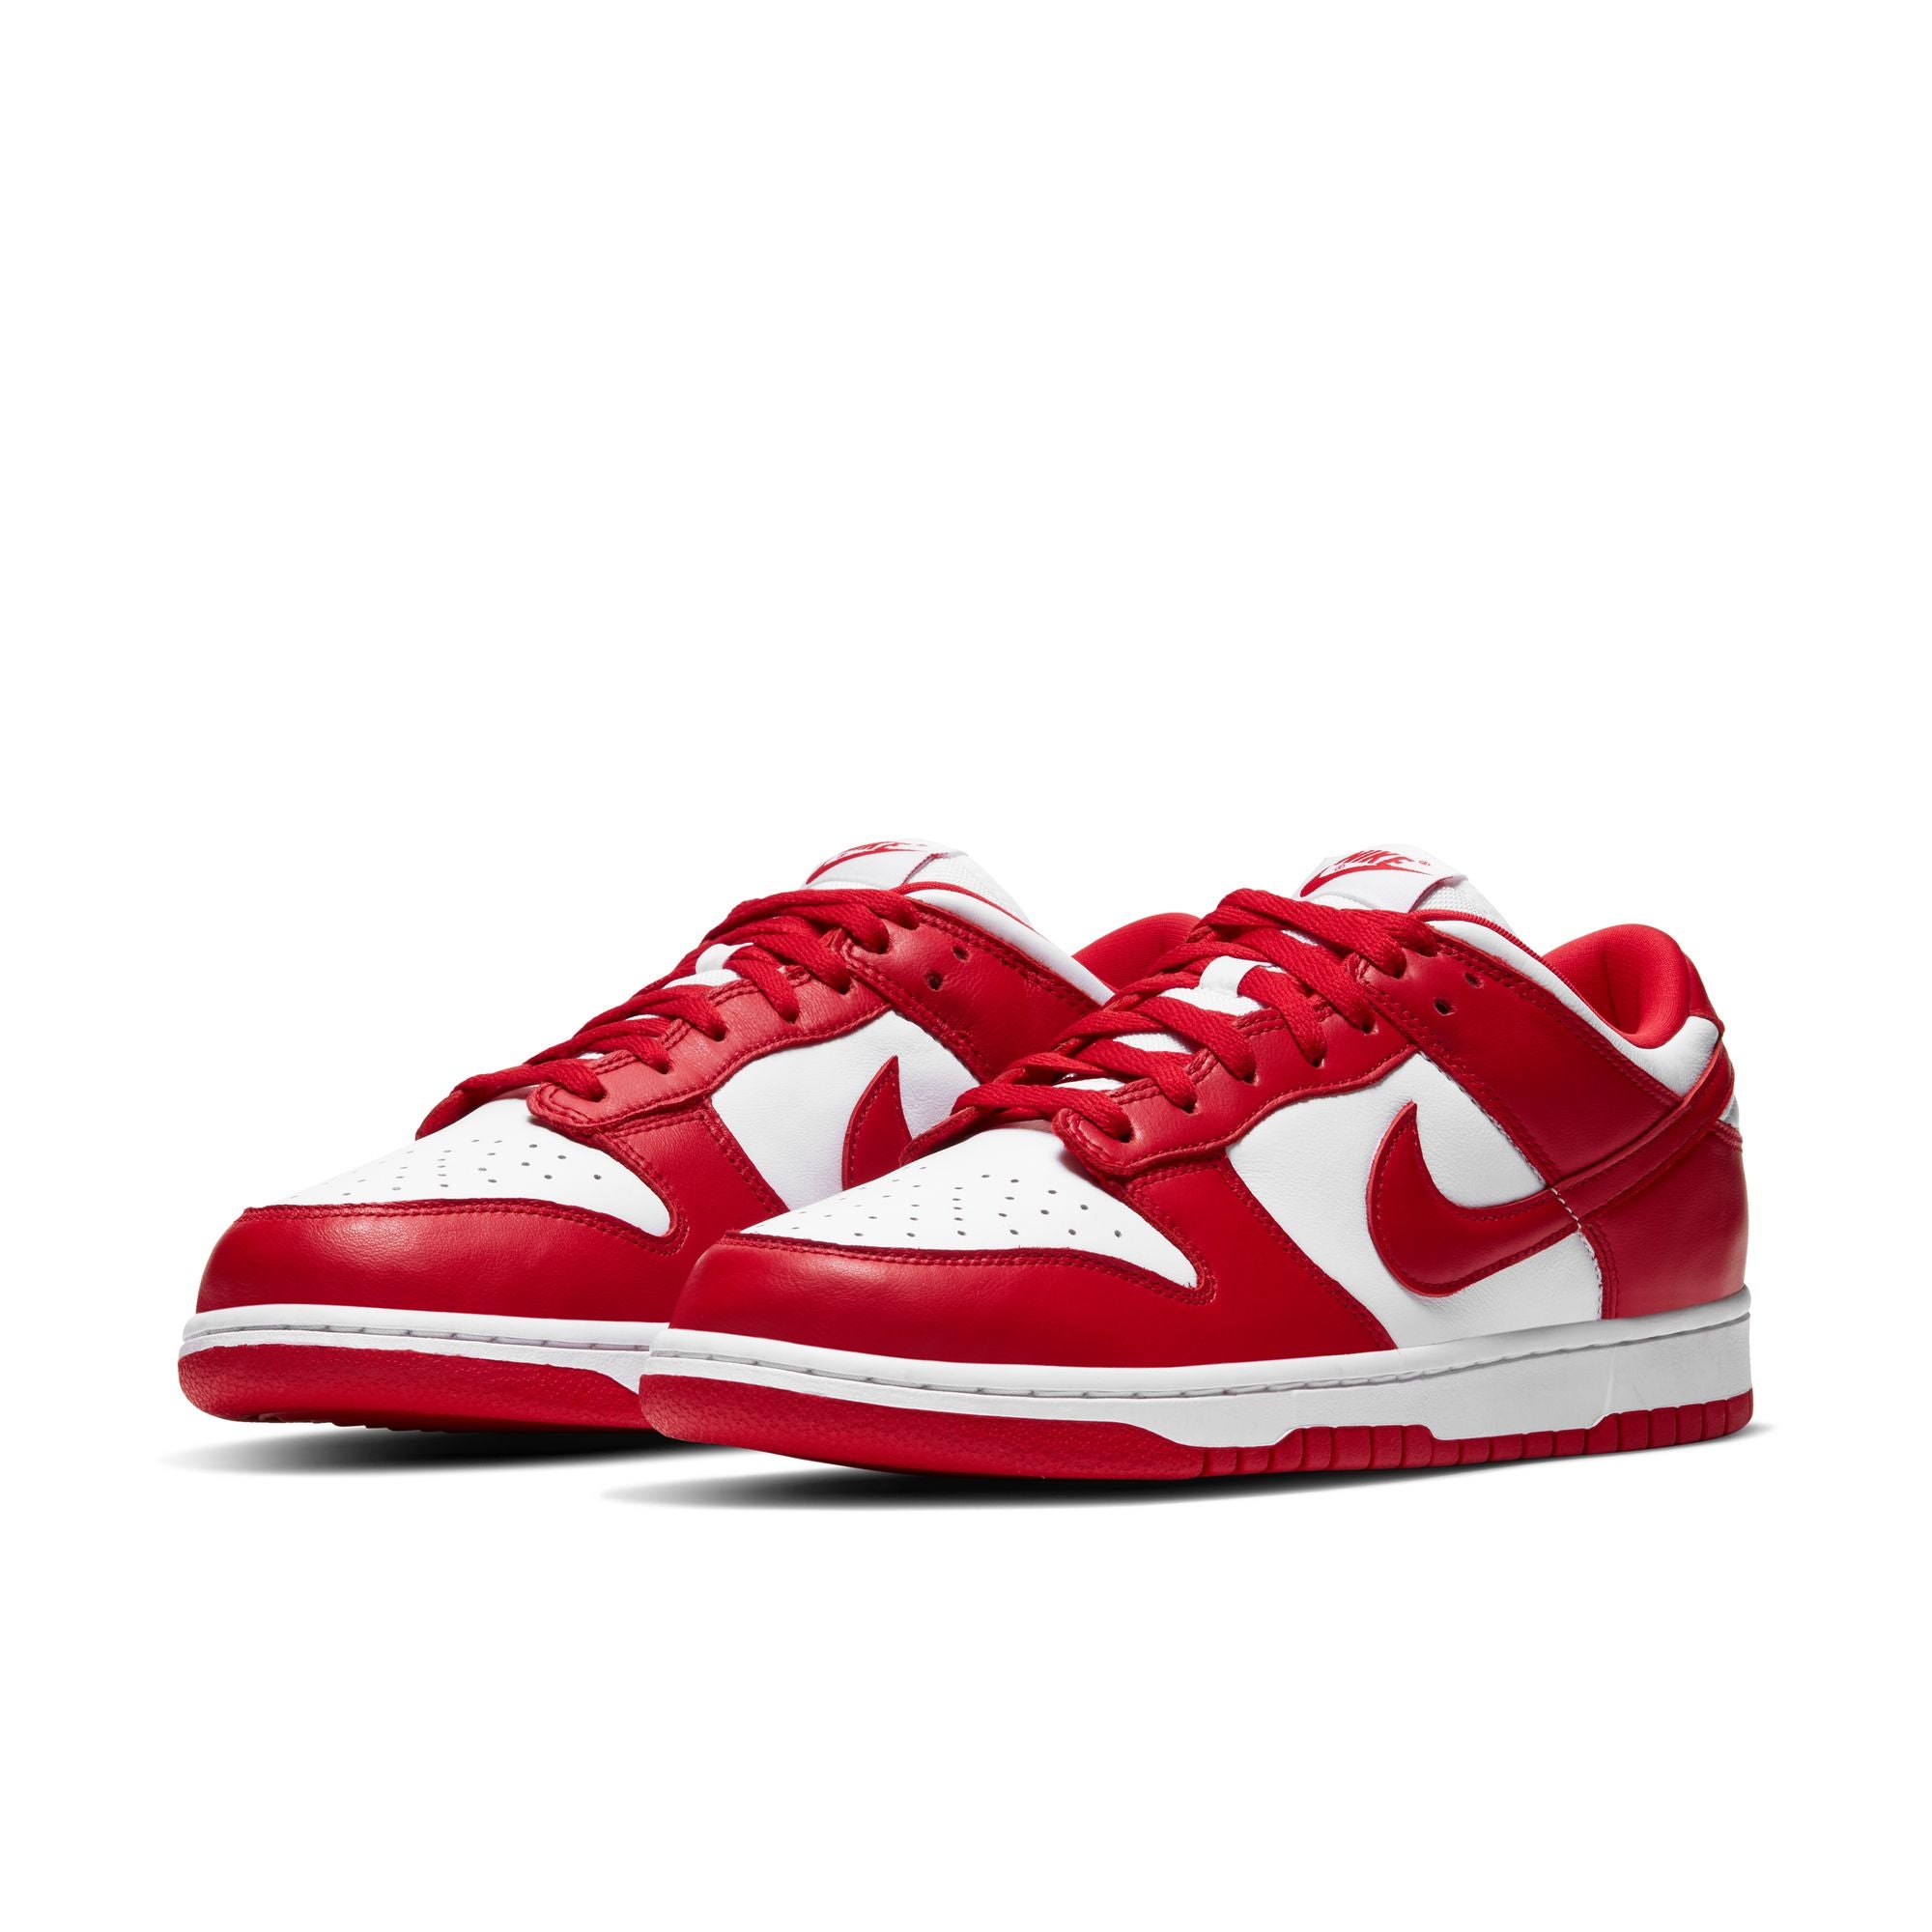 NIKE - Nike Dunk Low Sp - (White/University Red) view 4